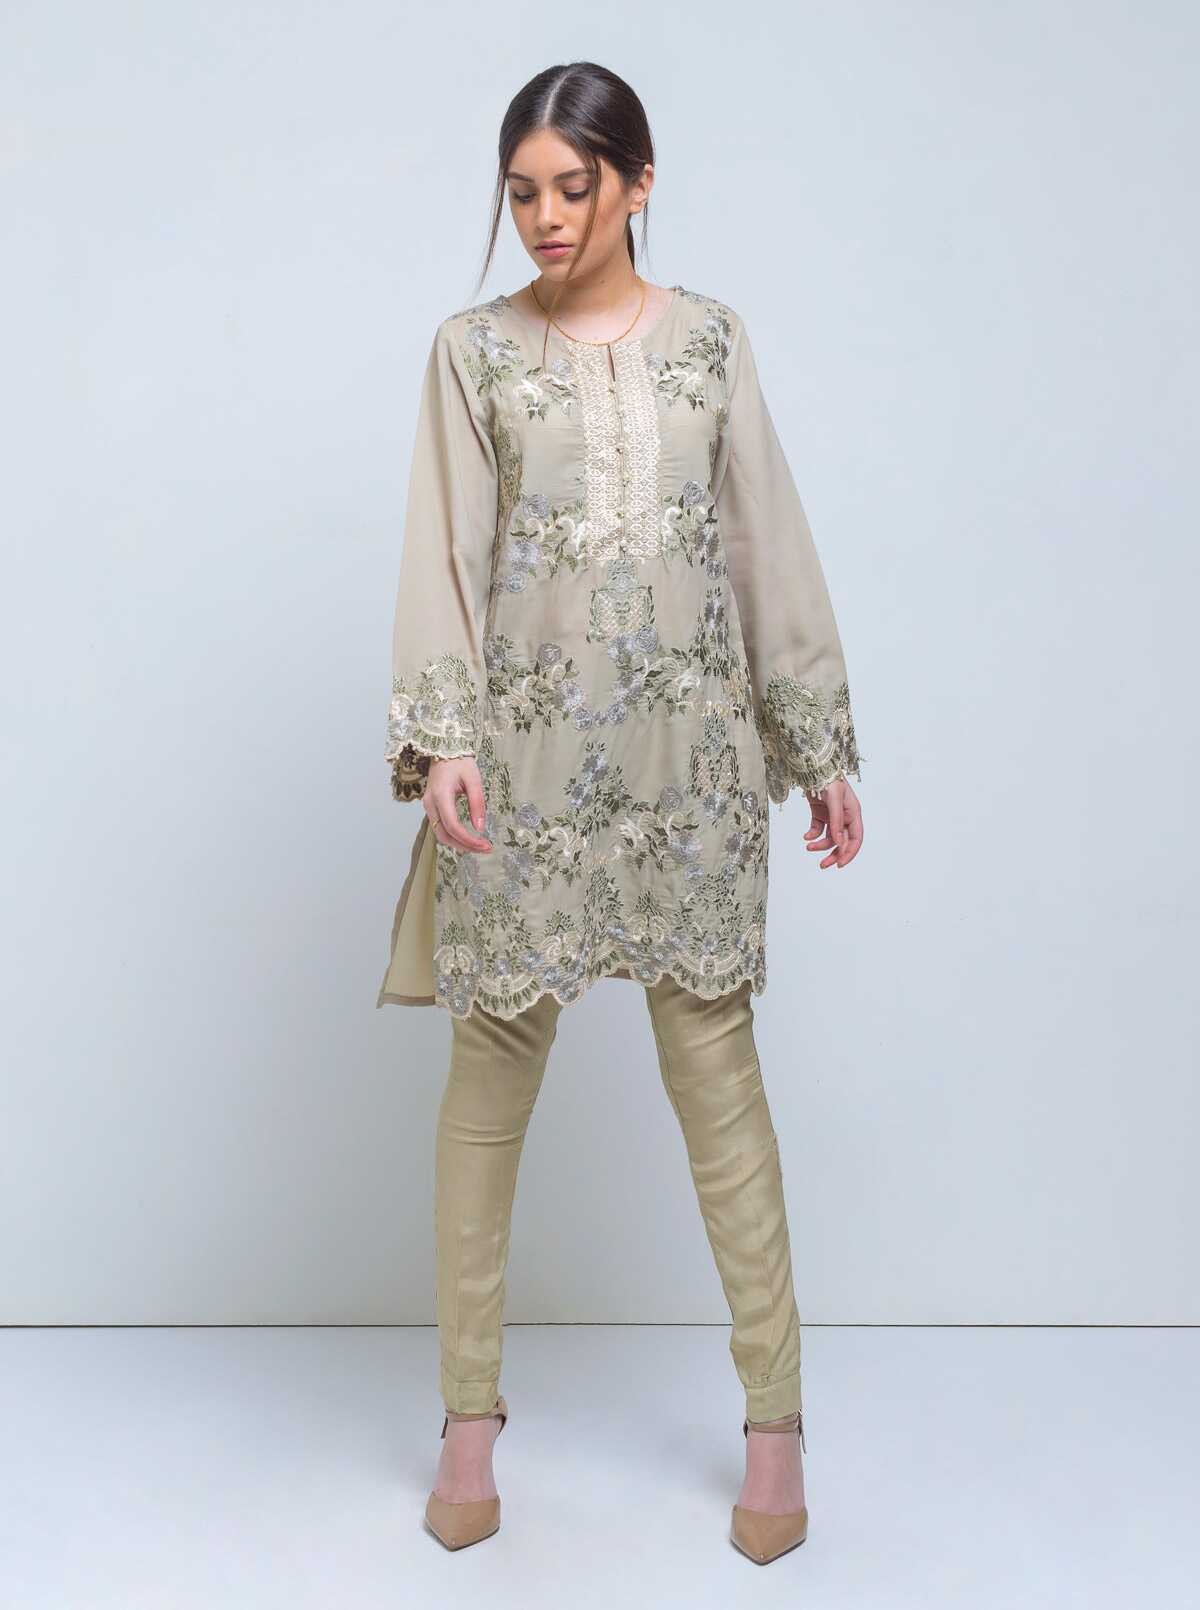 /2019/05/beechtree-eid-collection-19-embroidered-shirt-709-lime-image1.jpeg